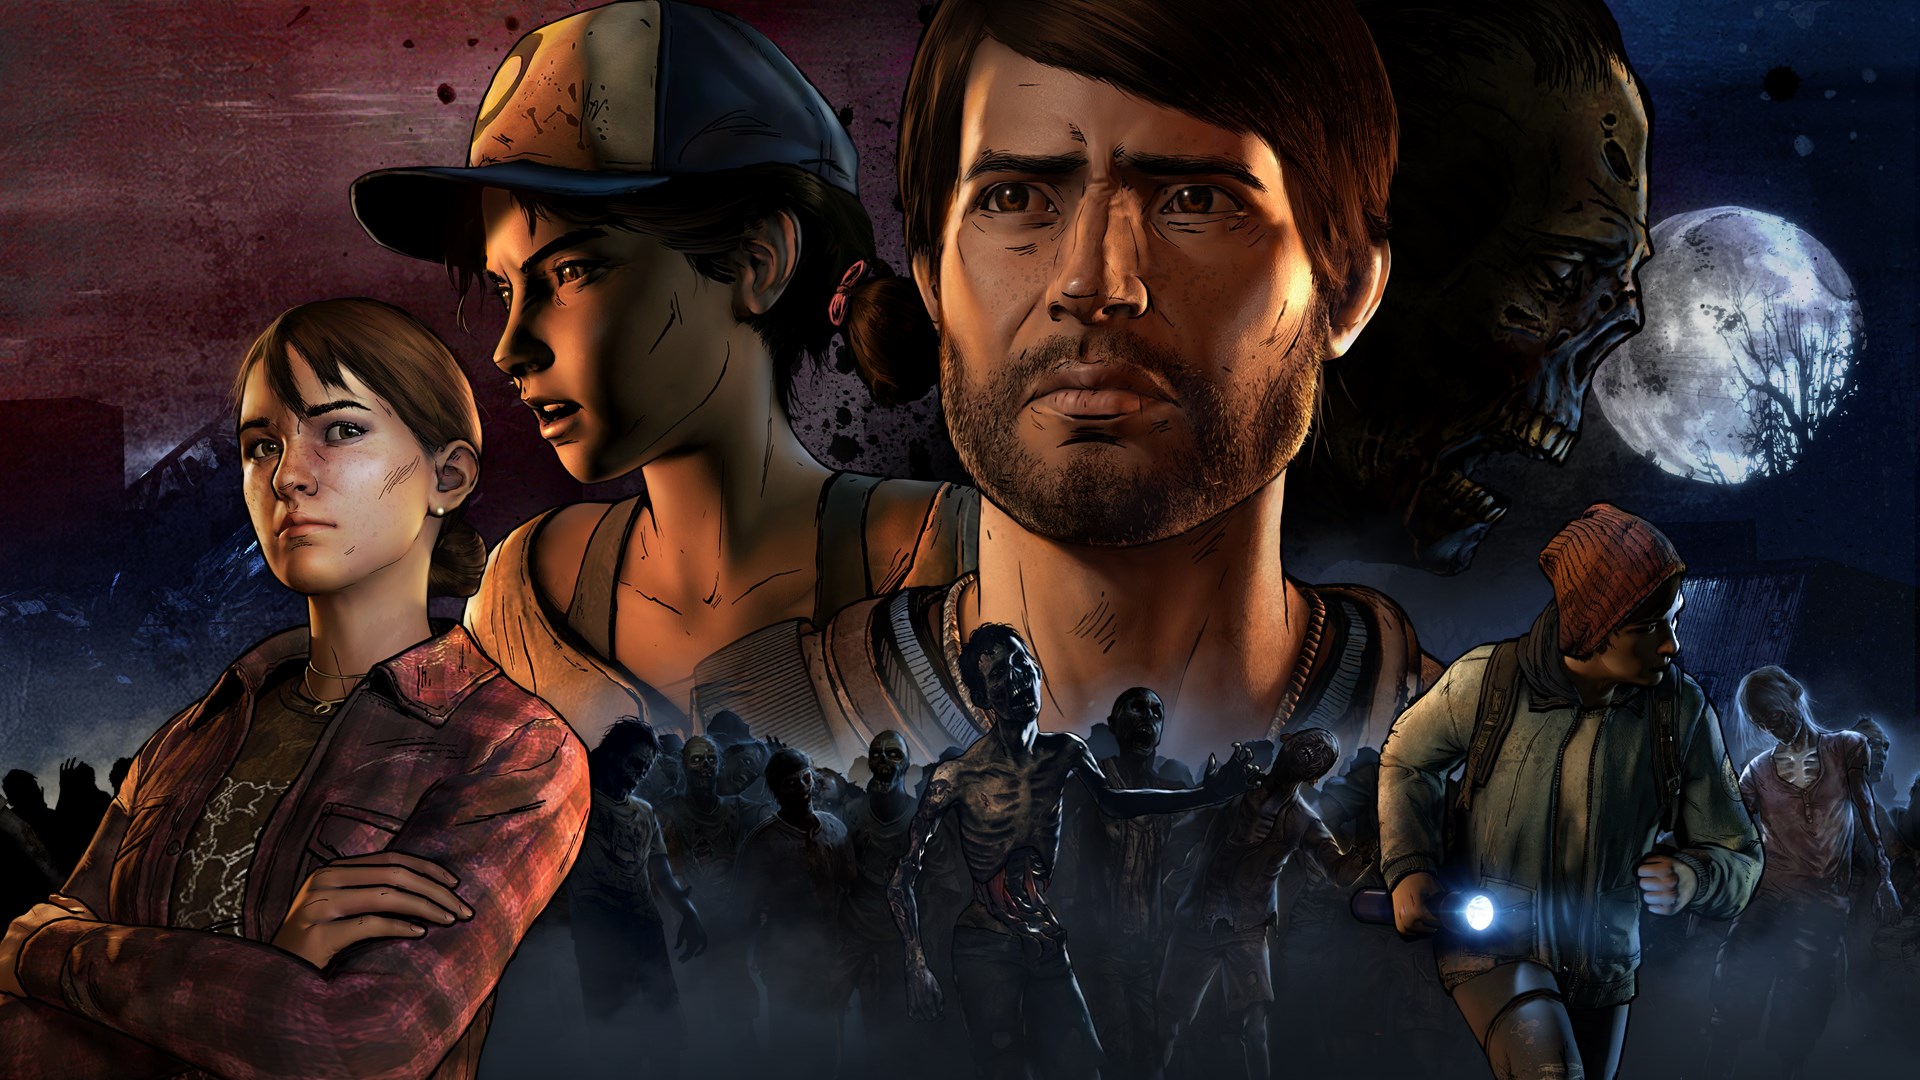 You are currently viewing The Walking Dead: A New Frontier (Saison 3) │ ★ 8